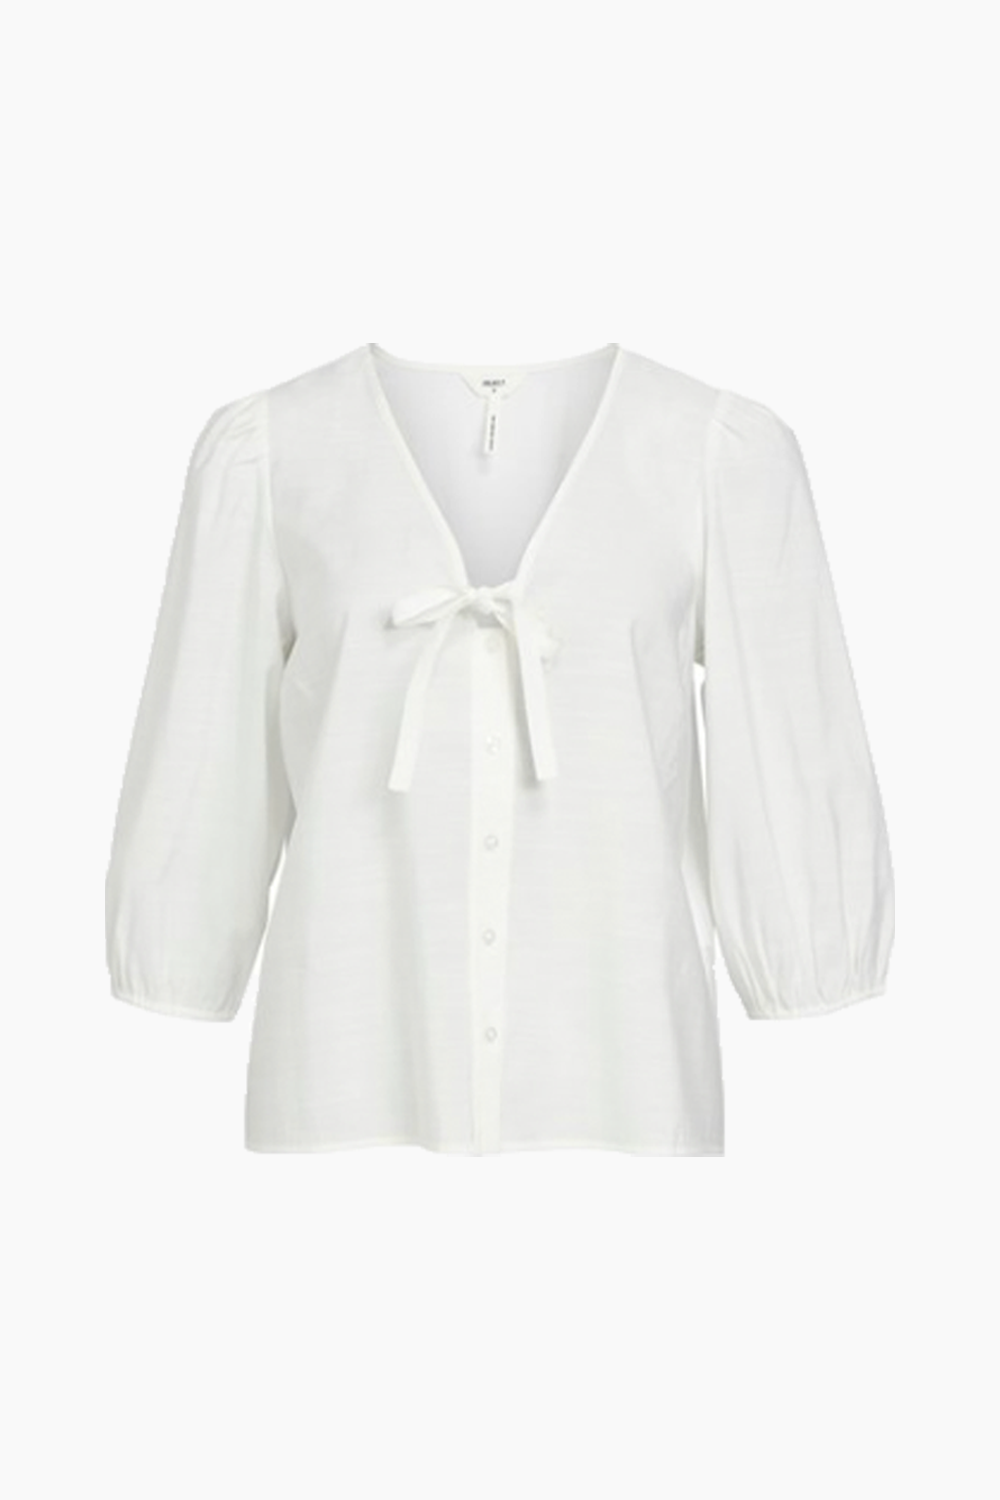 OBJSY 3/4 BOW SHIRT A DIV - White - Object